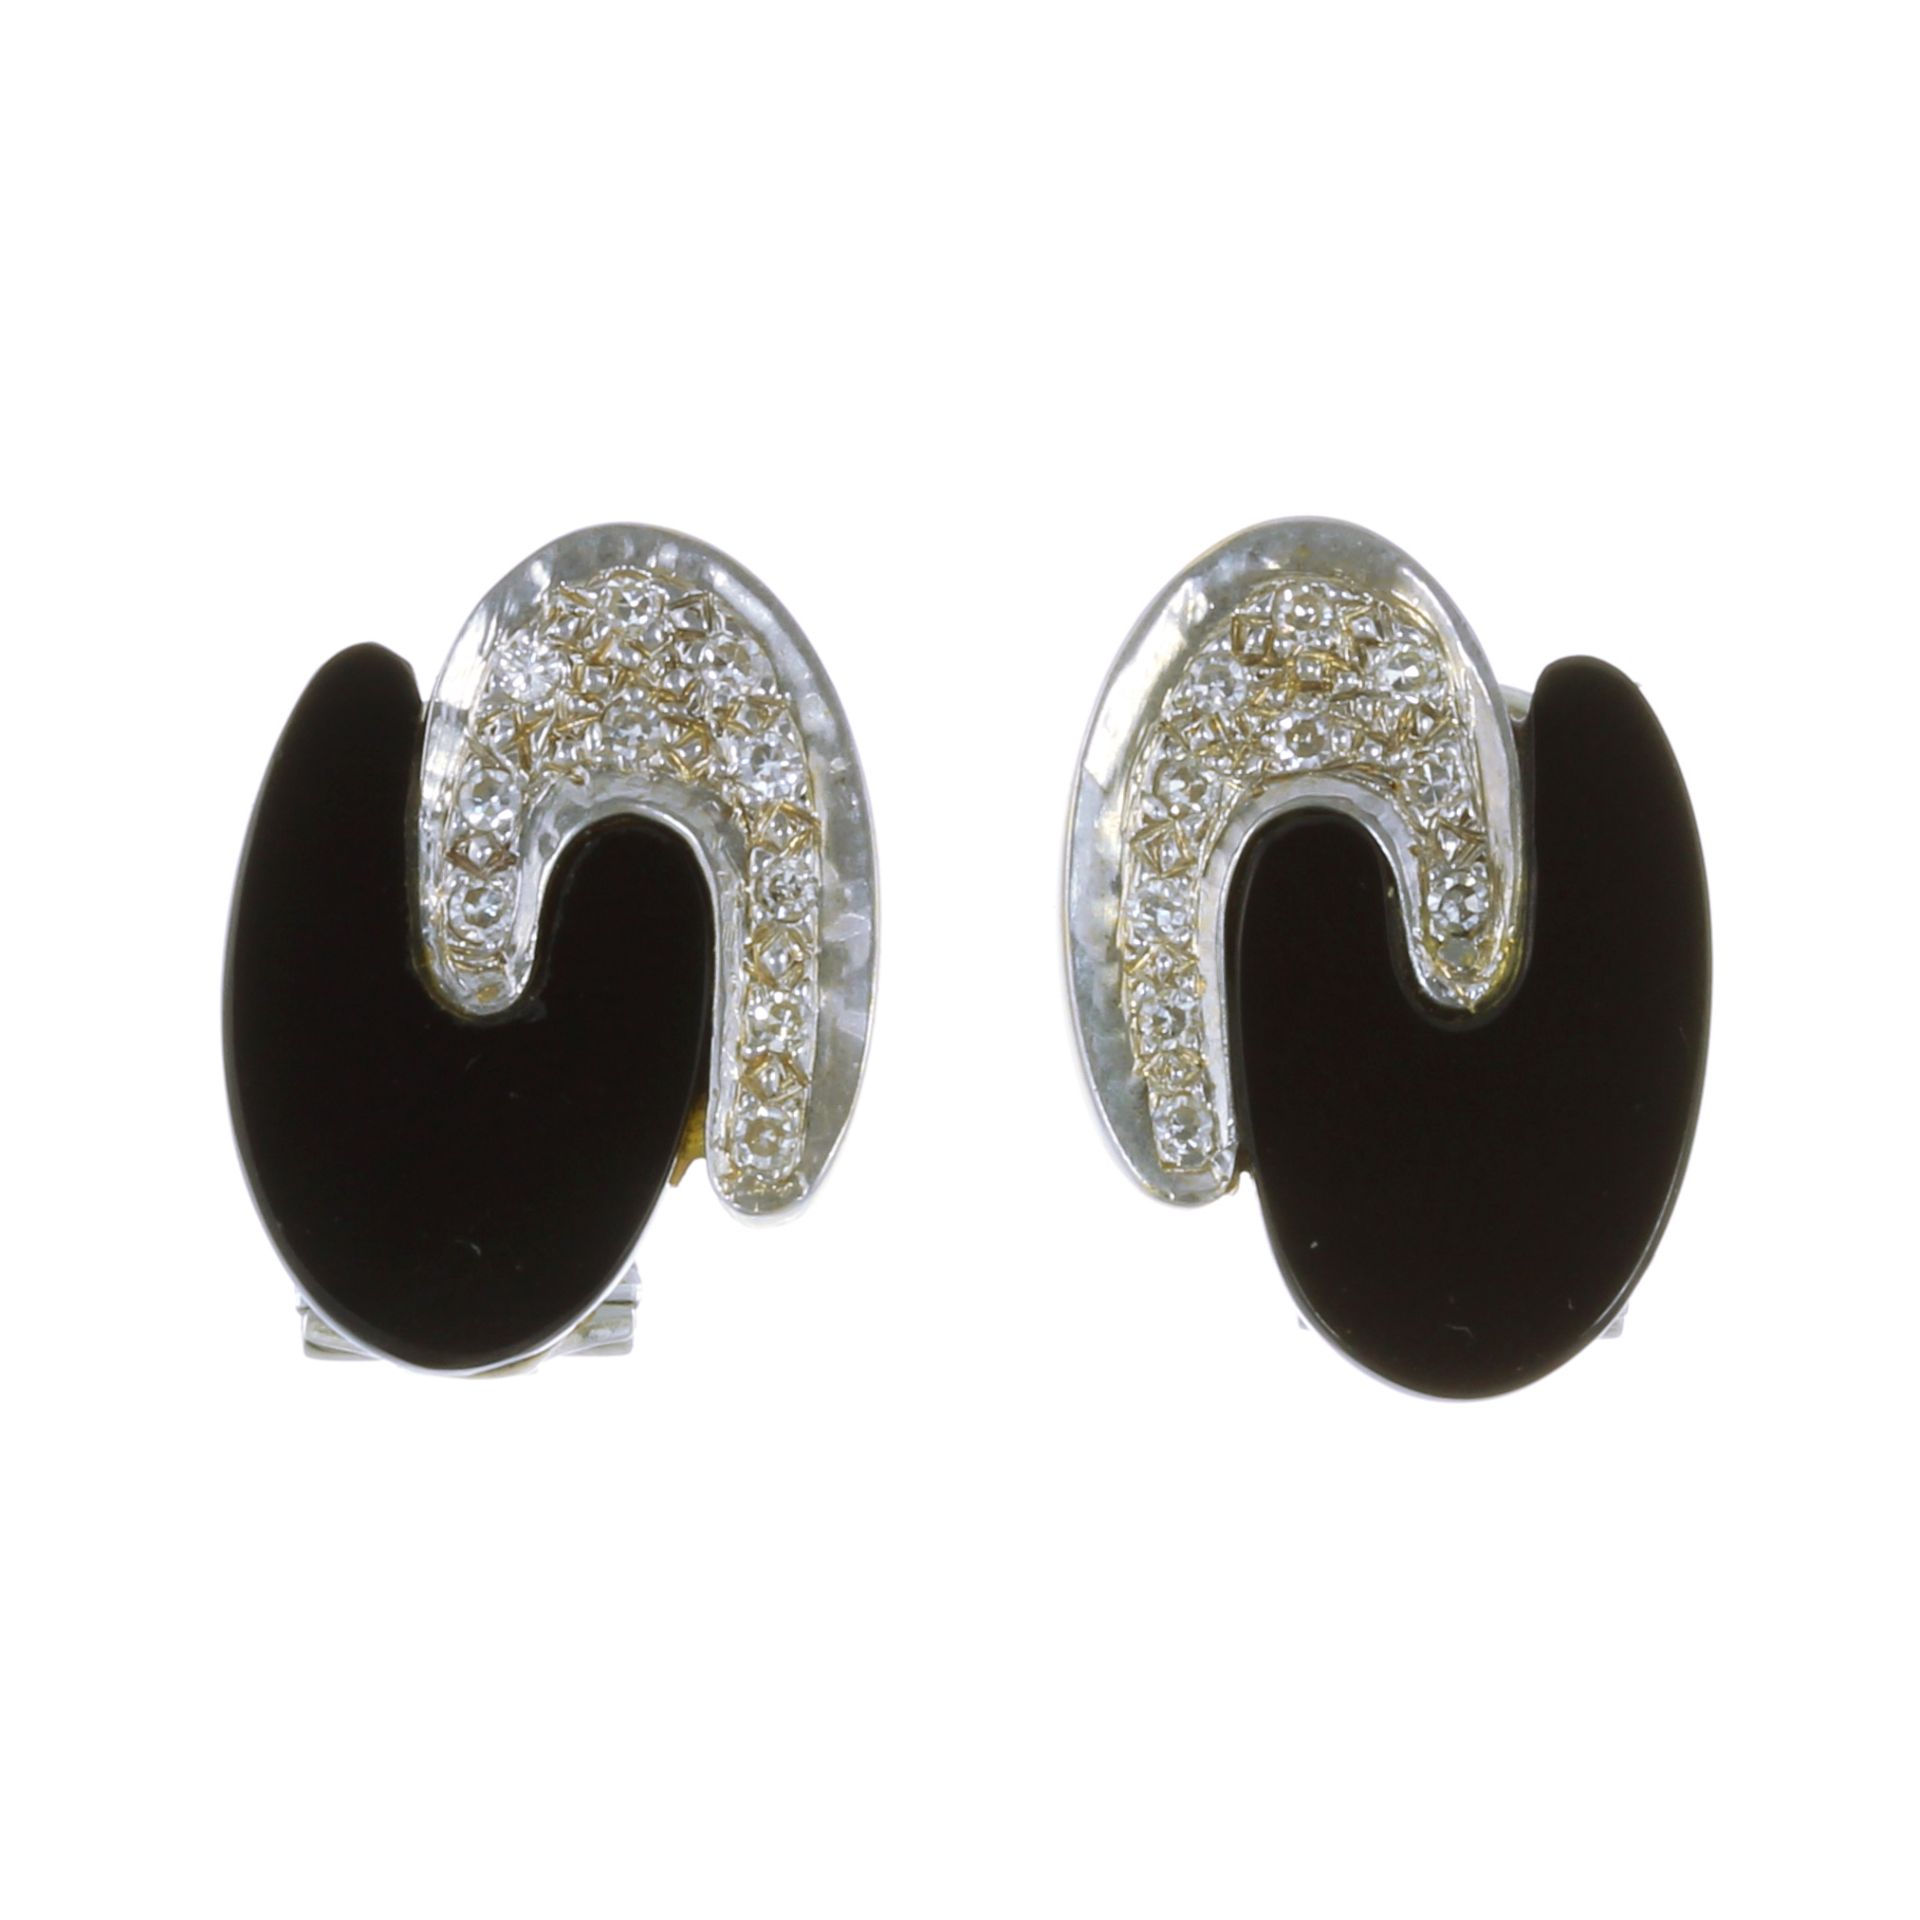 A PAIR OF ONYX AND DIAMOND CLIP EARRINGS, CIRCA 1973 in 18ct white gold, each designed as two